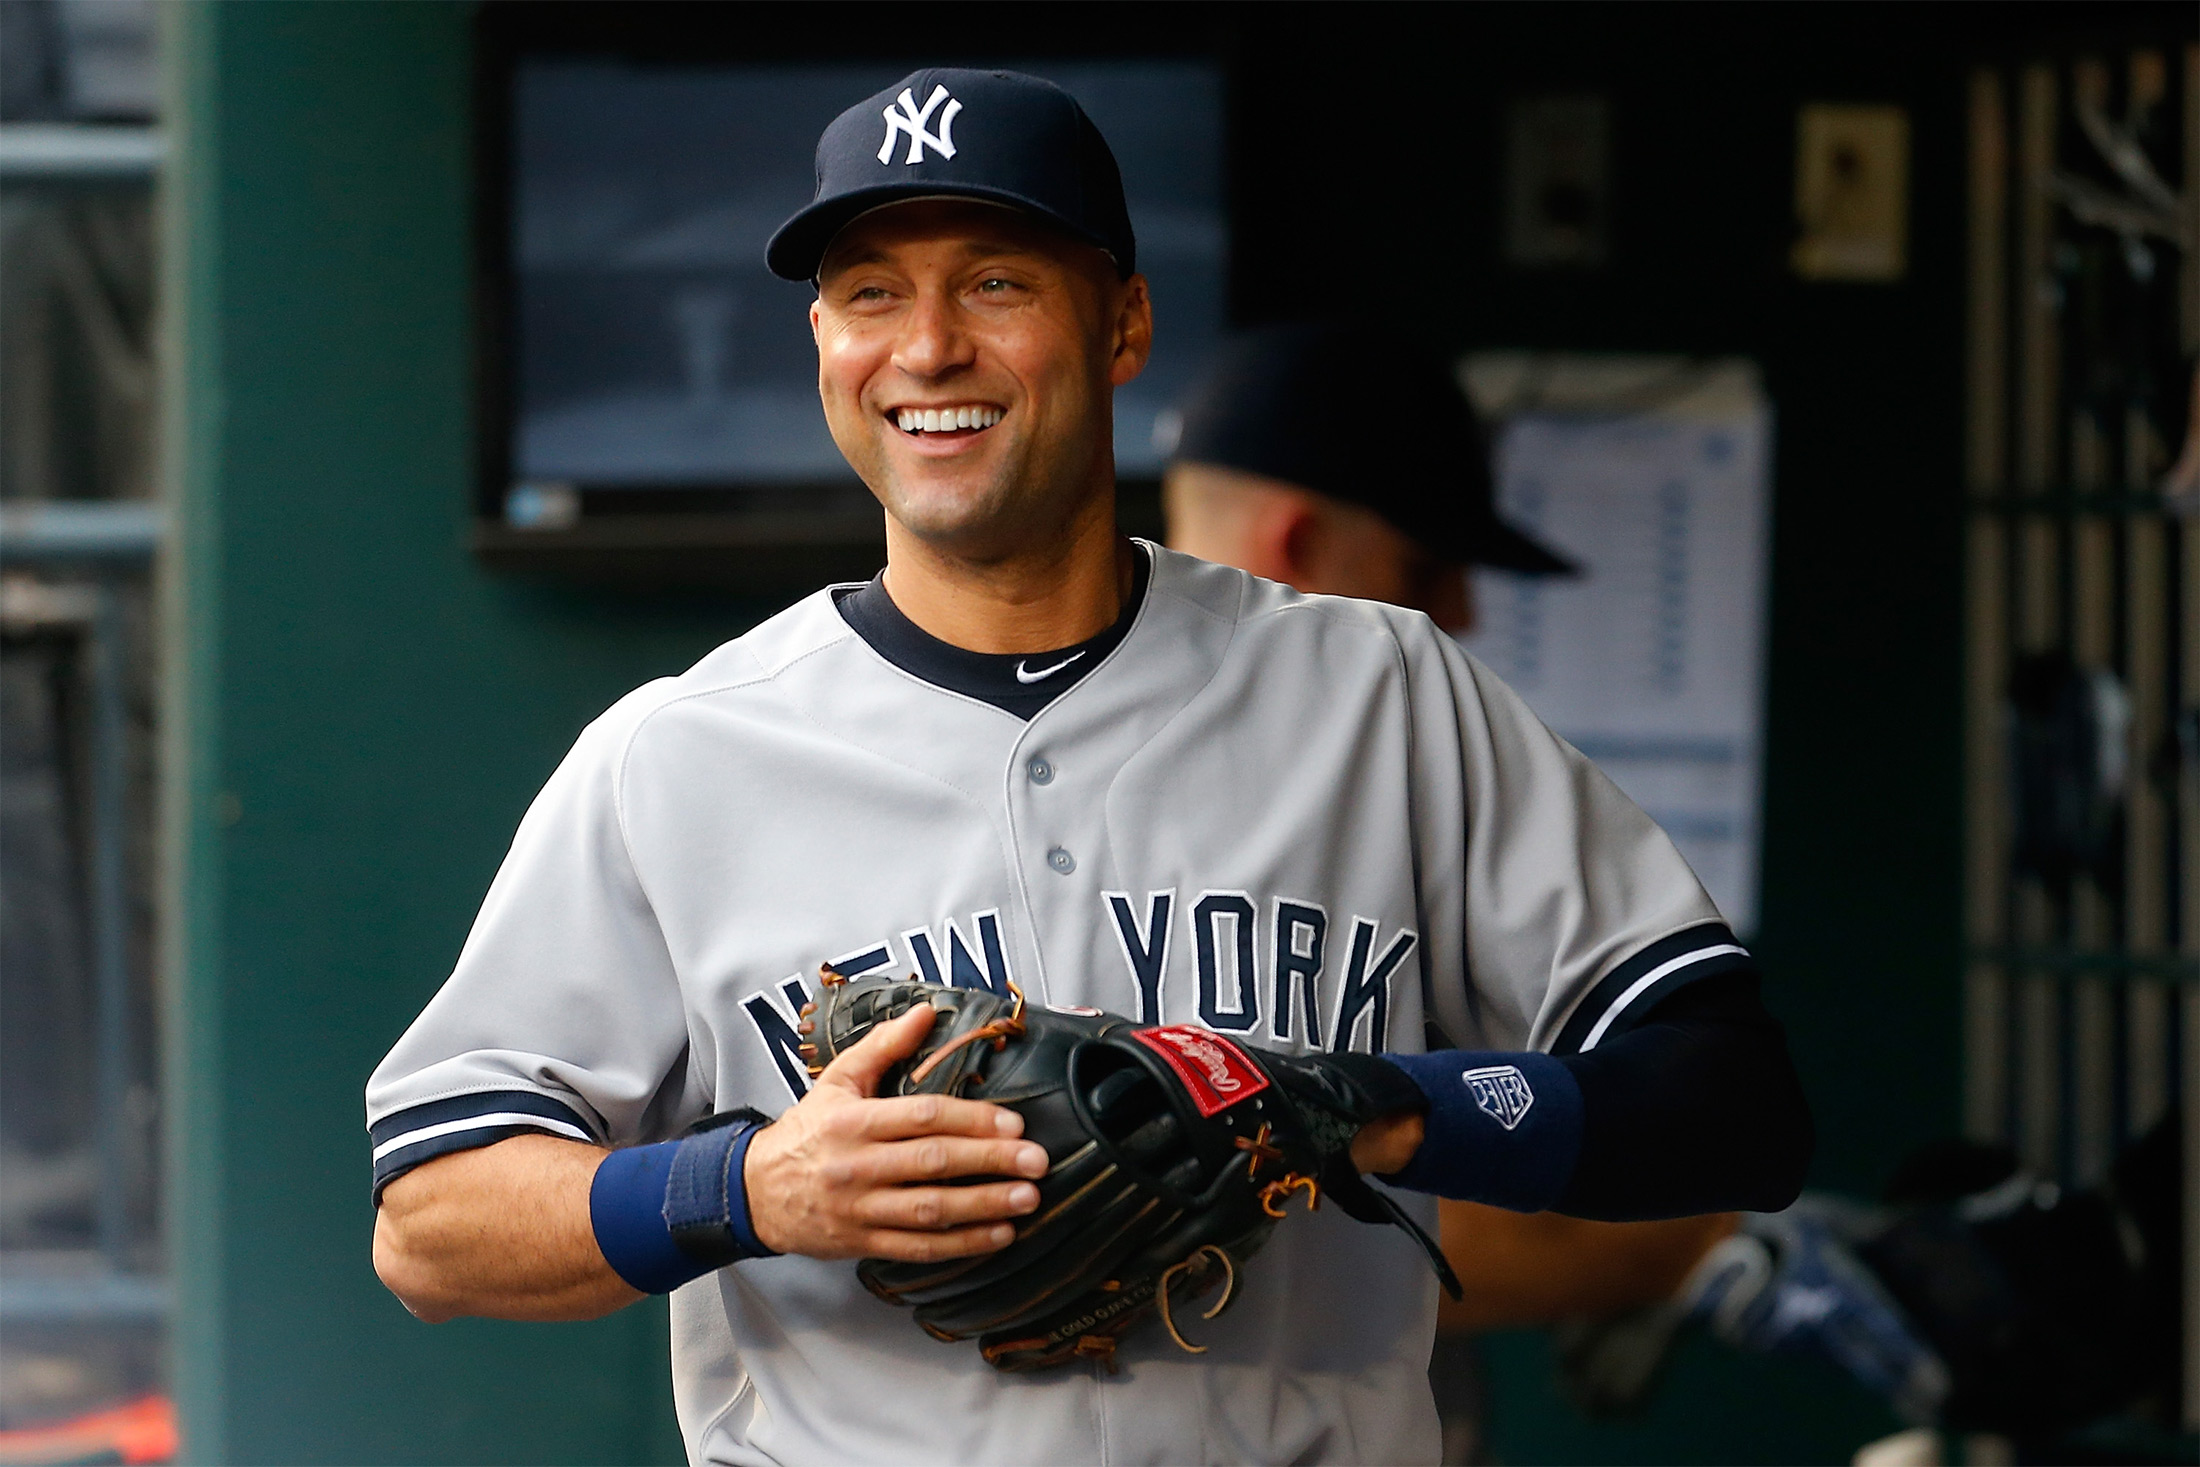 Jeter 1 vote shy of unanimous, Walker also elected to Hall